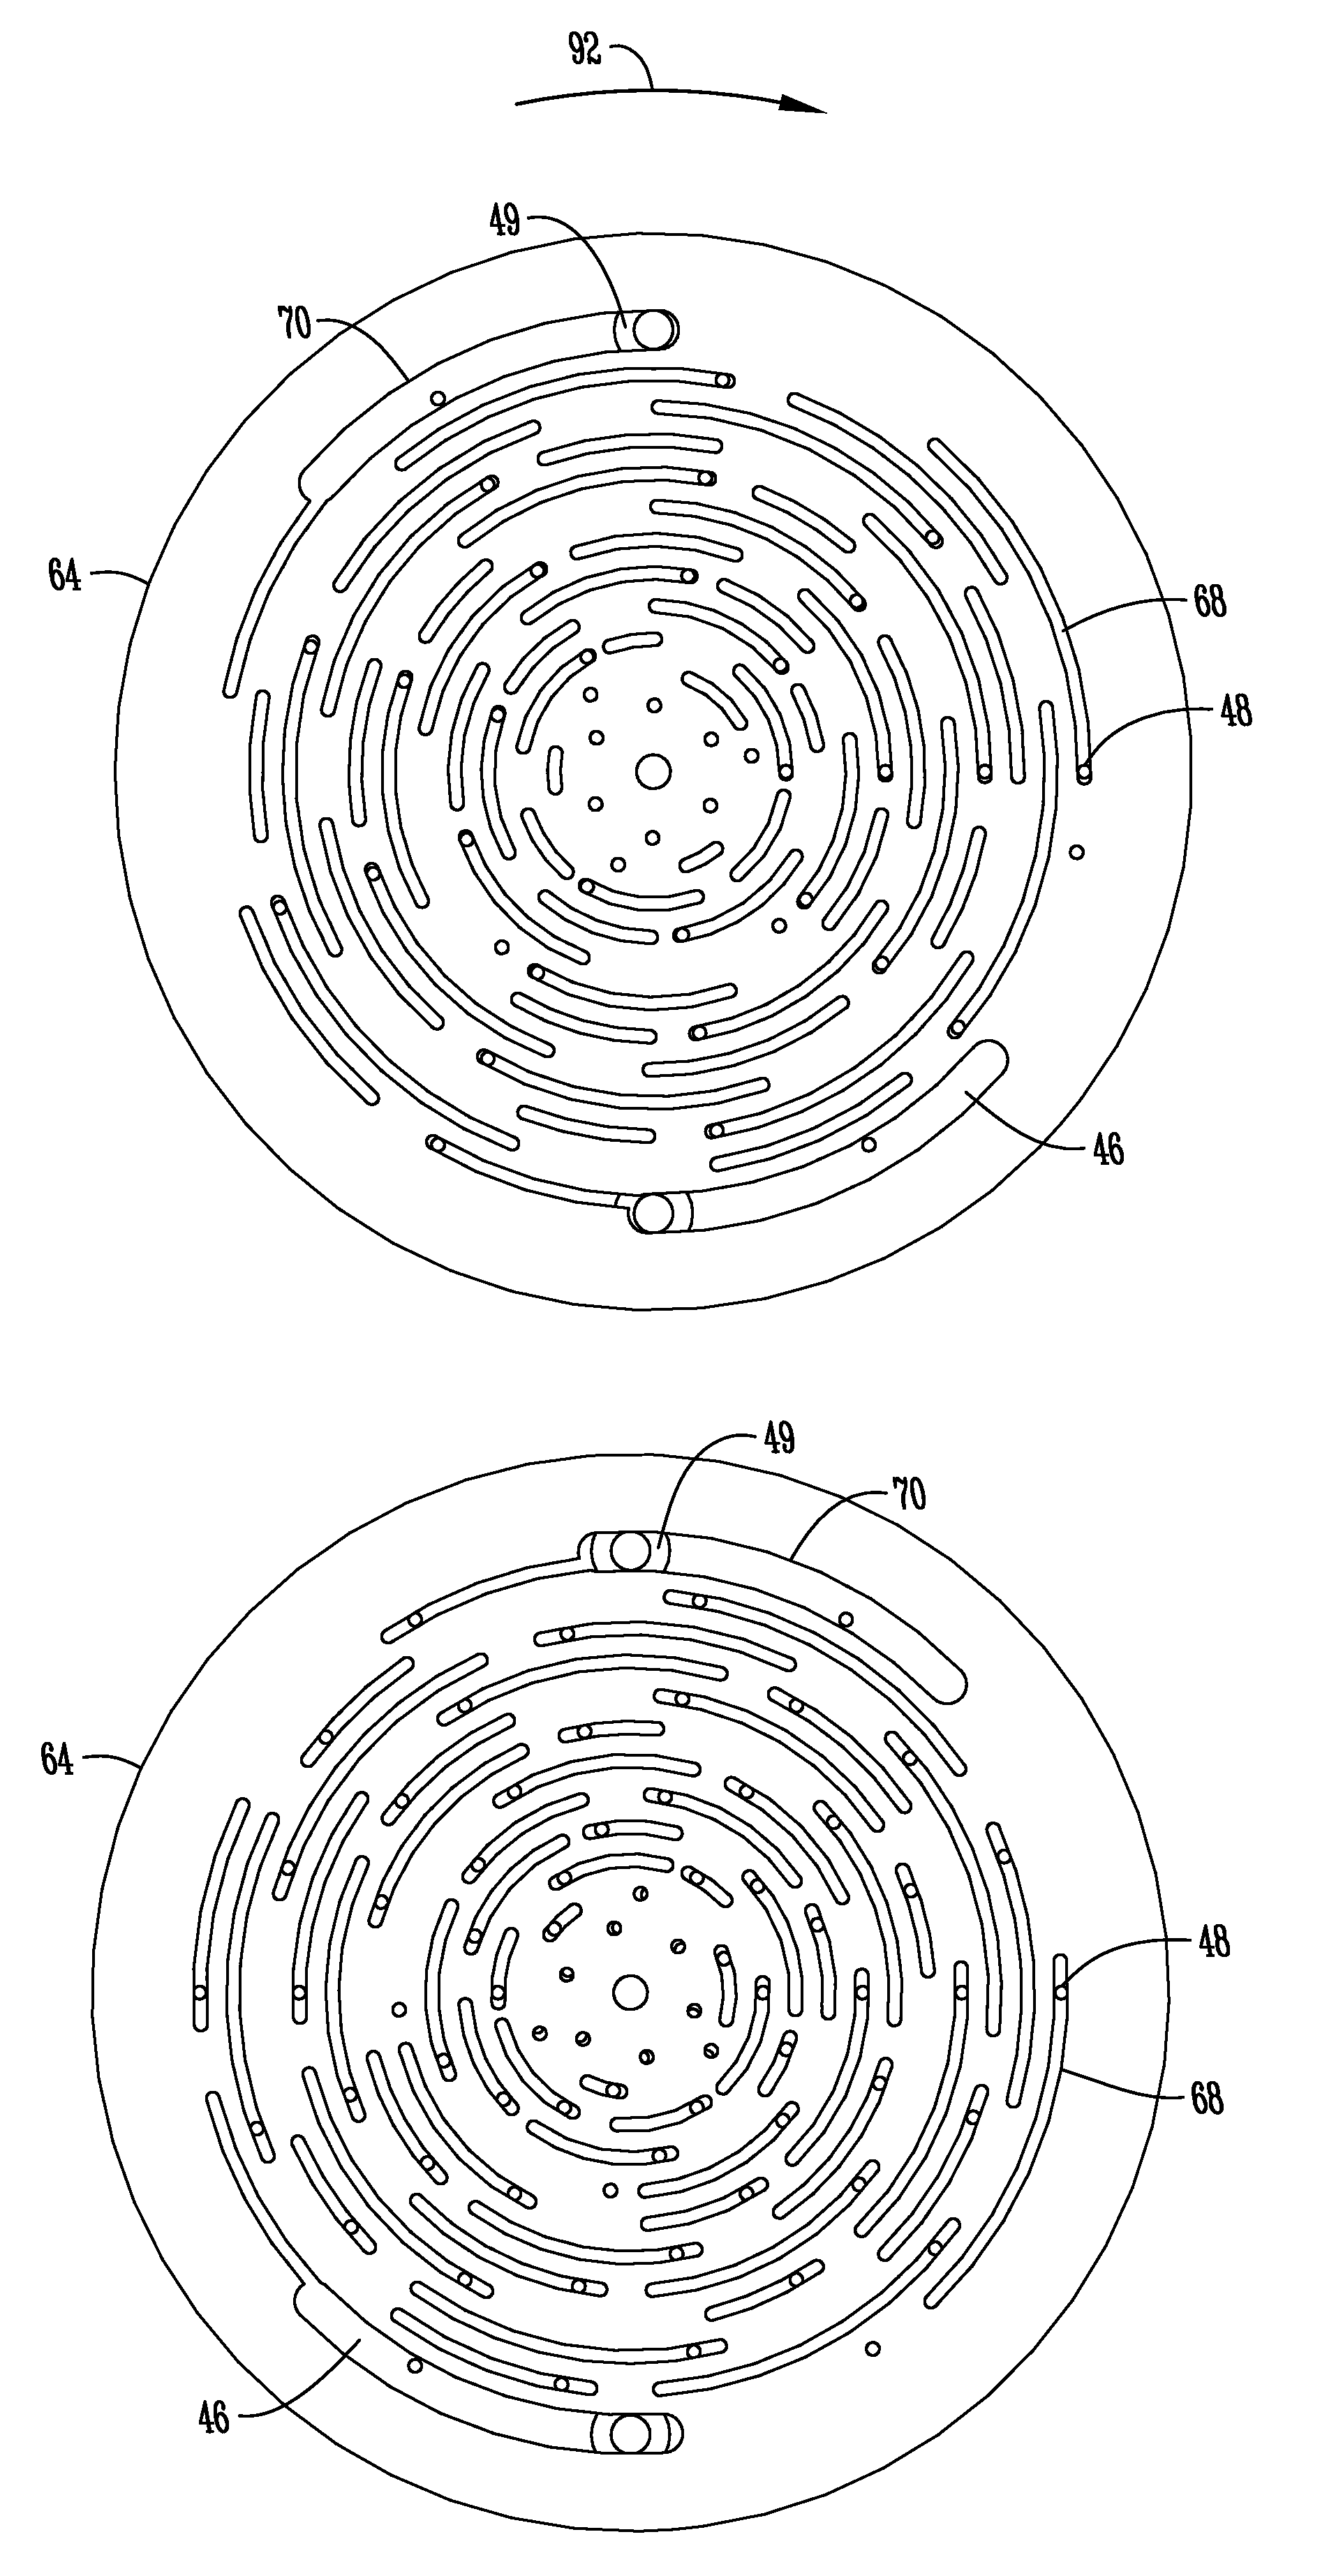 Method and apparatus for variation of flow to erode solid chemistry